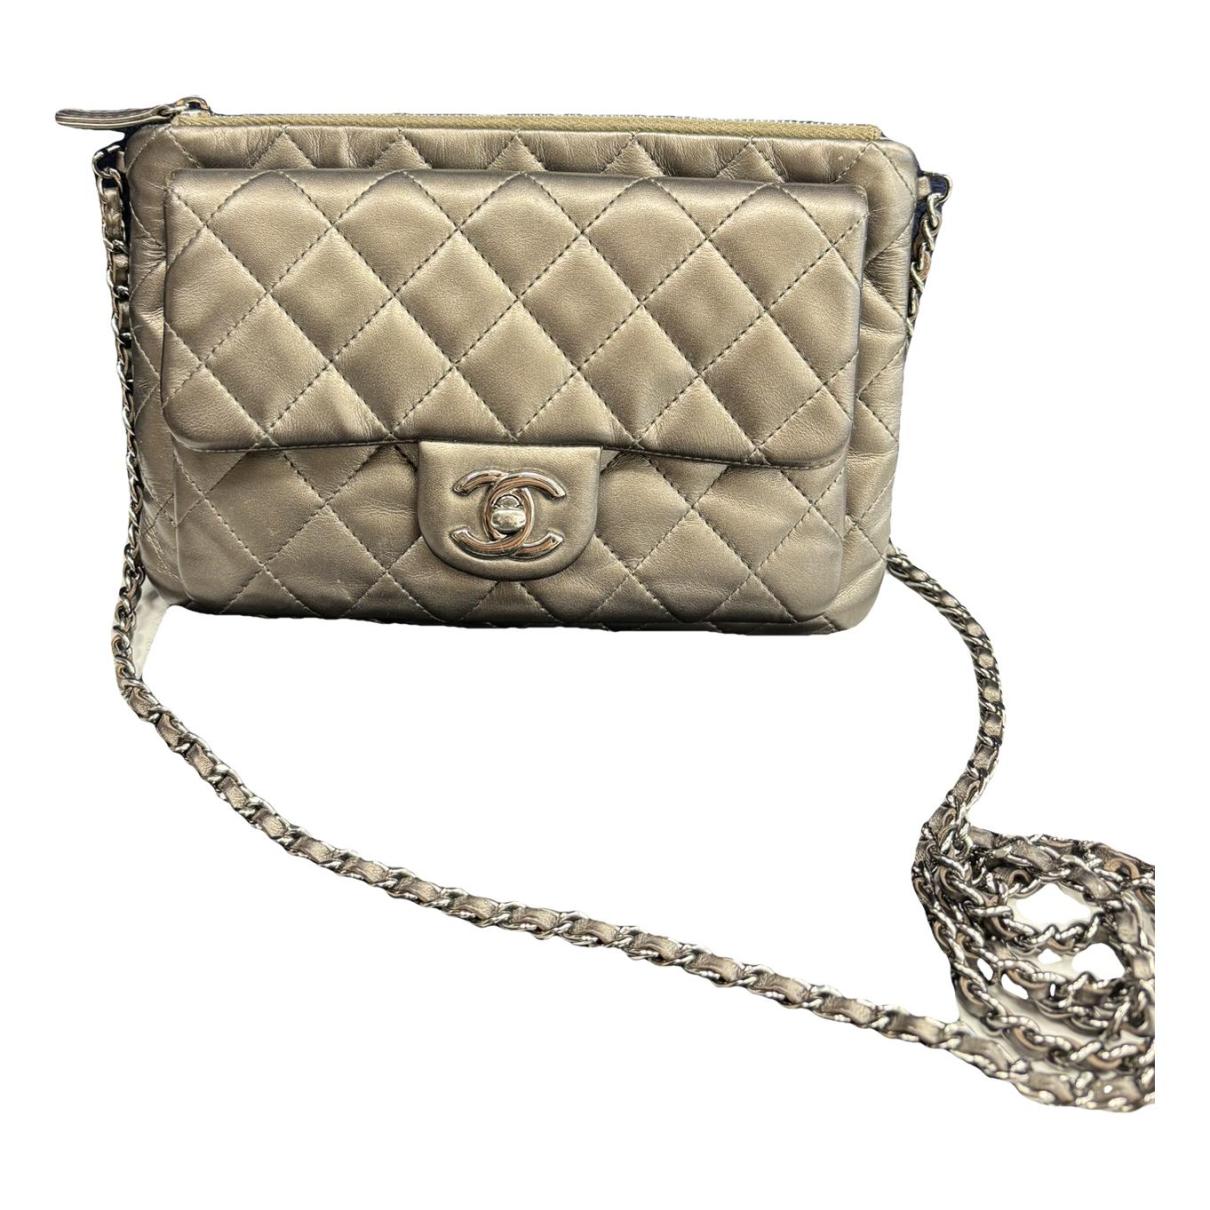 Chanel 19 leather handbag Chanel Beige in Leather - 35922425